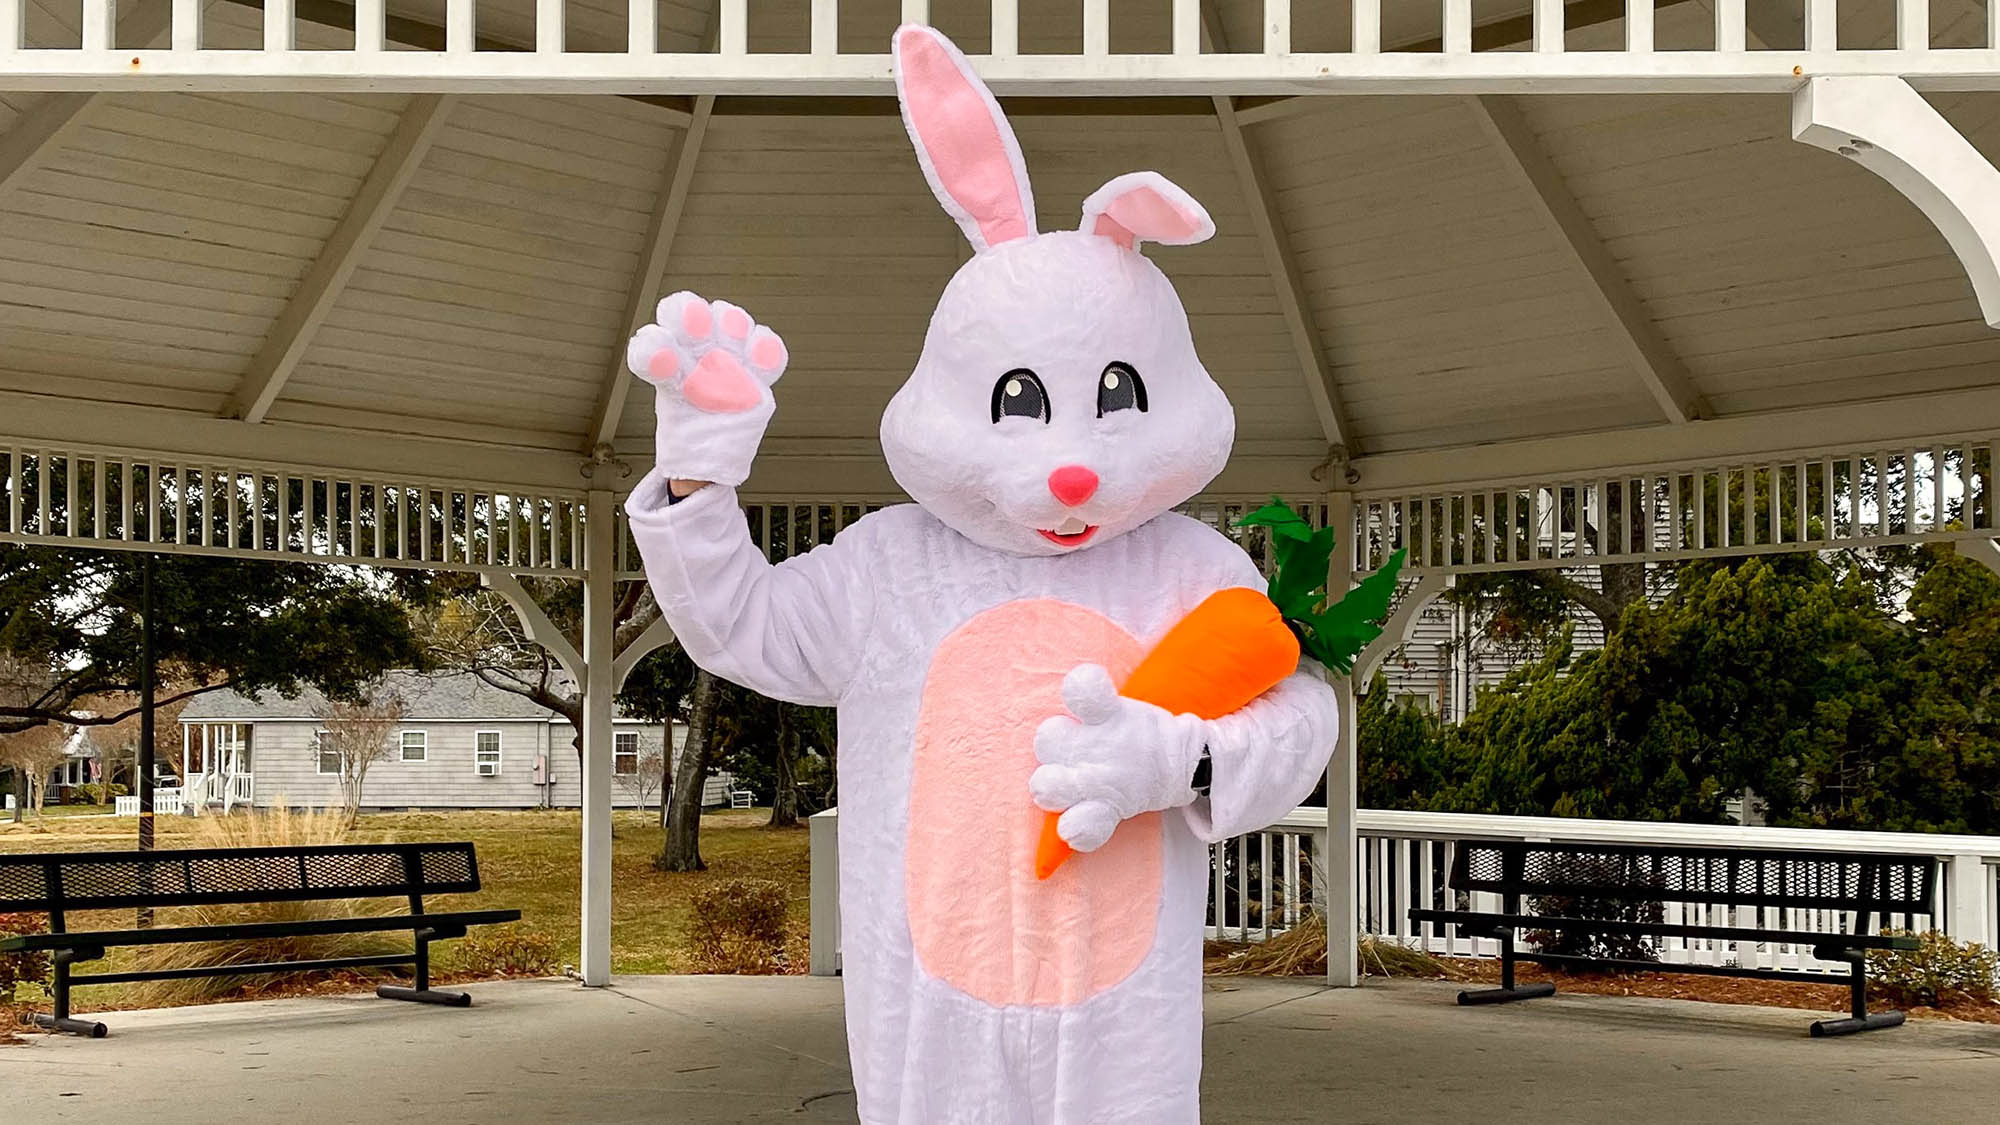 Person in Easter Bunny costume waving and holding large toy carrot